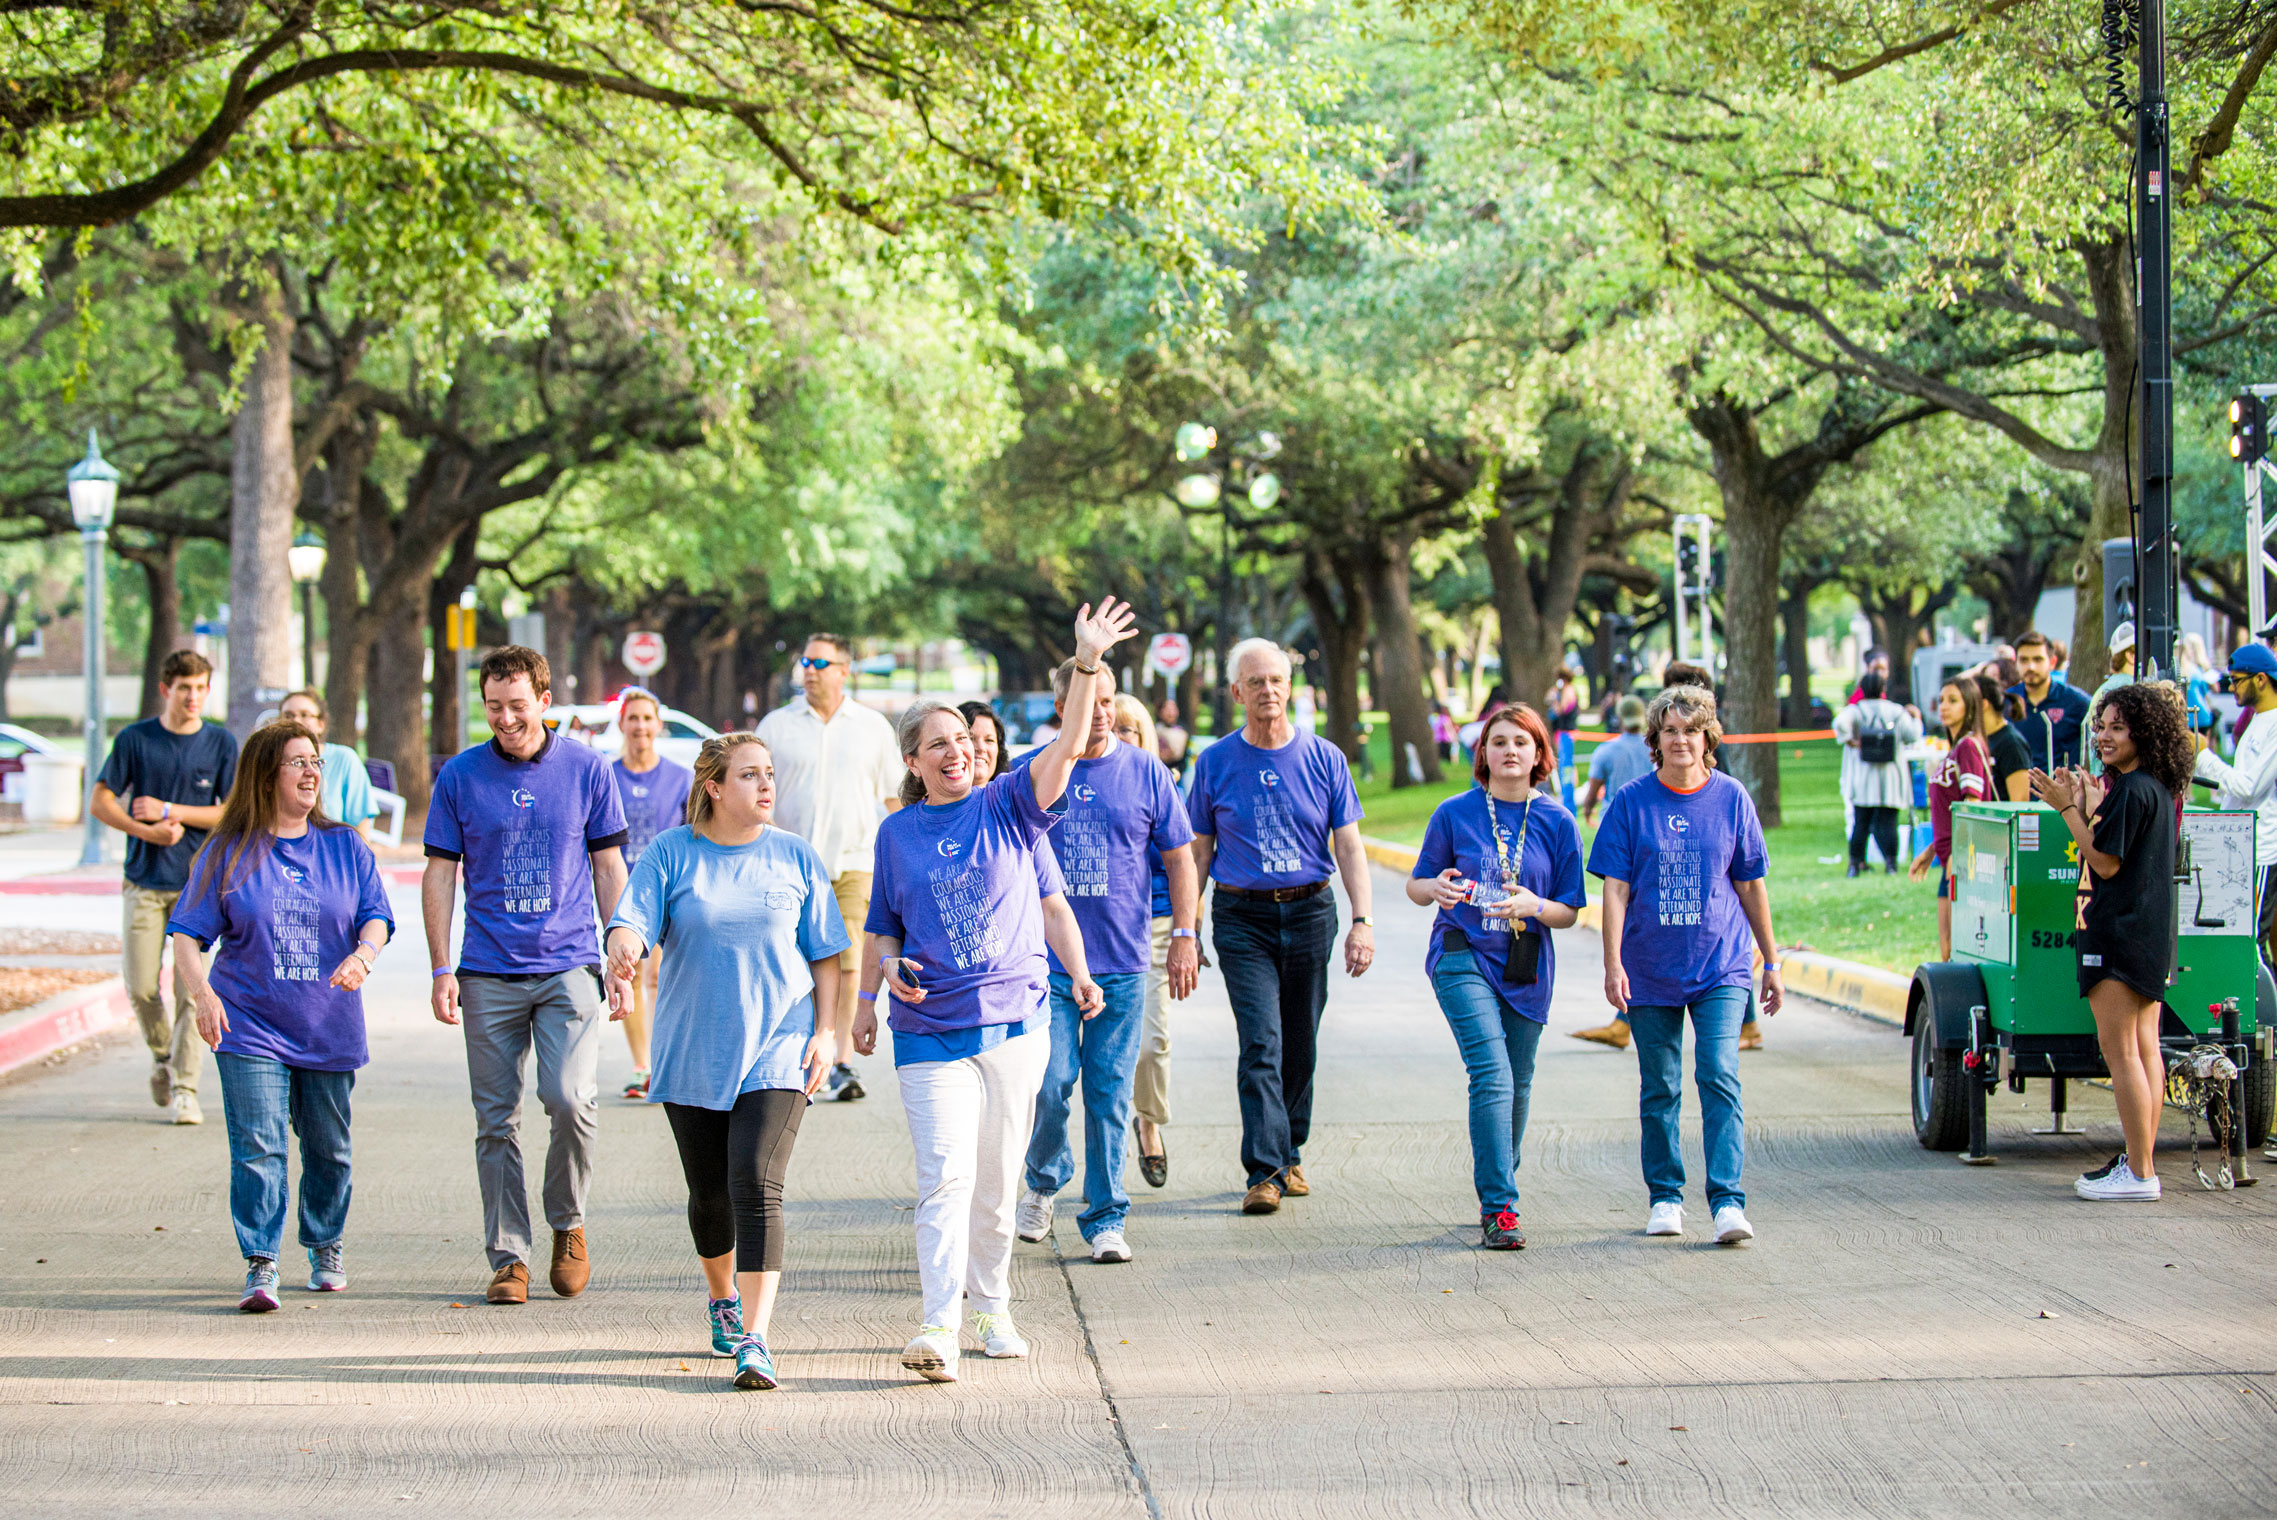 American Cancer Society people walking